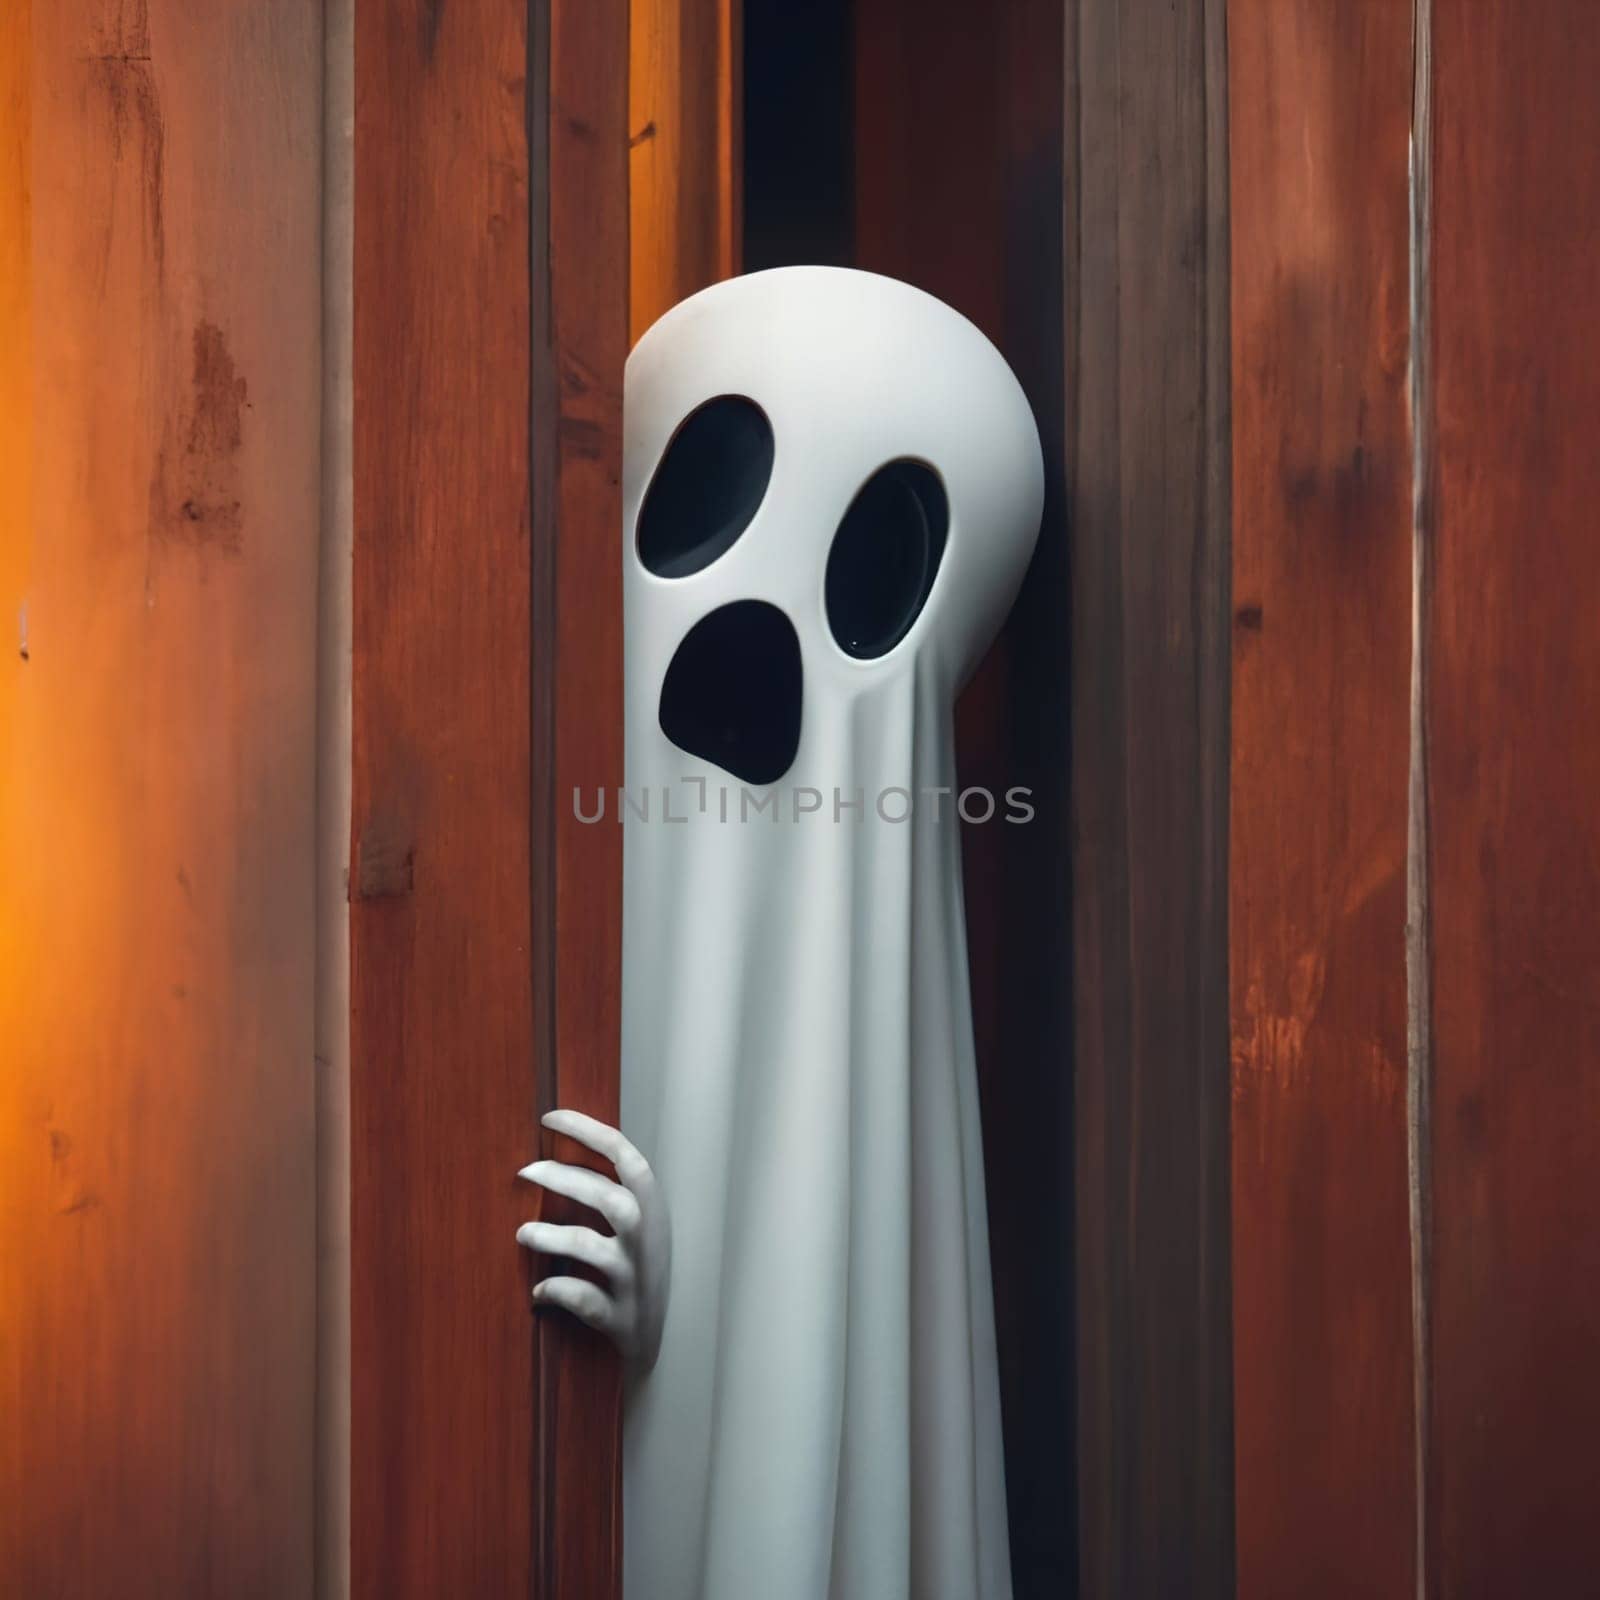 Cute Funny Ghost Peeks from Wall Corner - Playful and Adorable Ghost Illustration download image